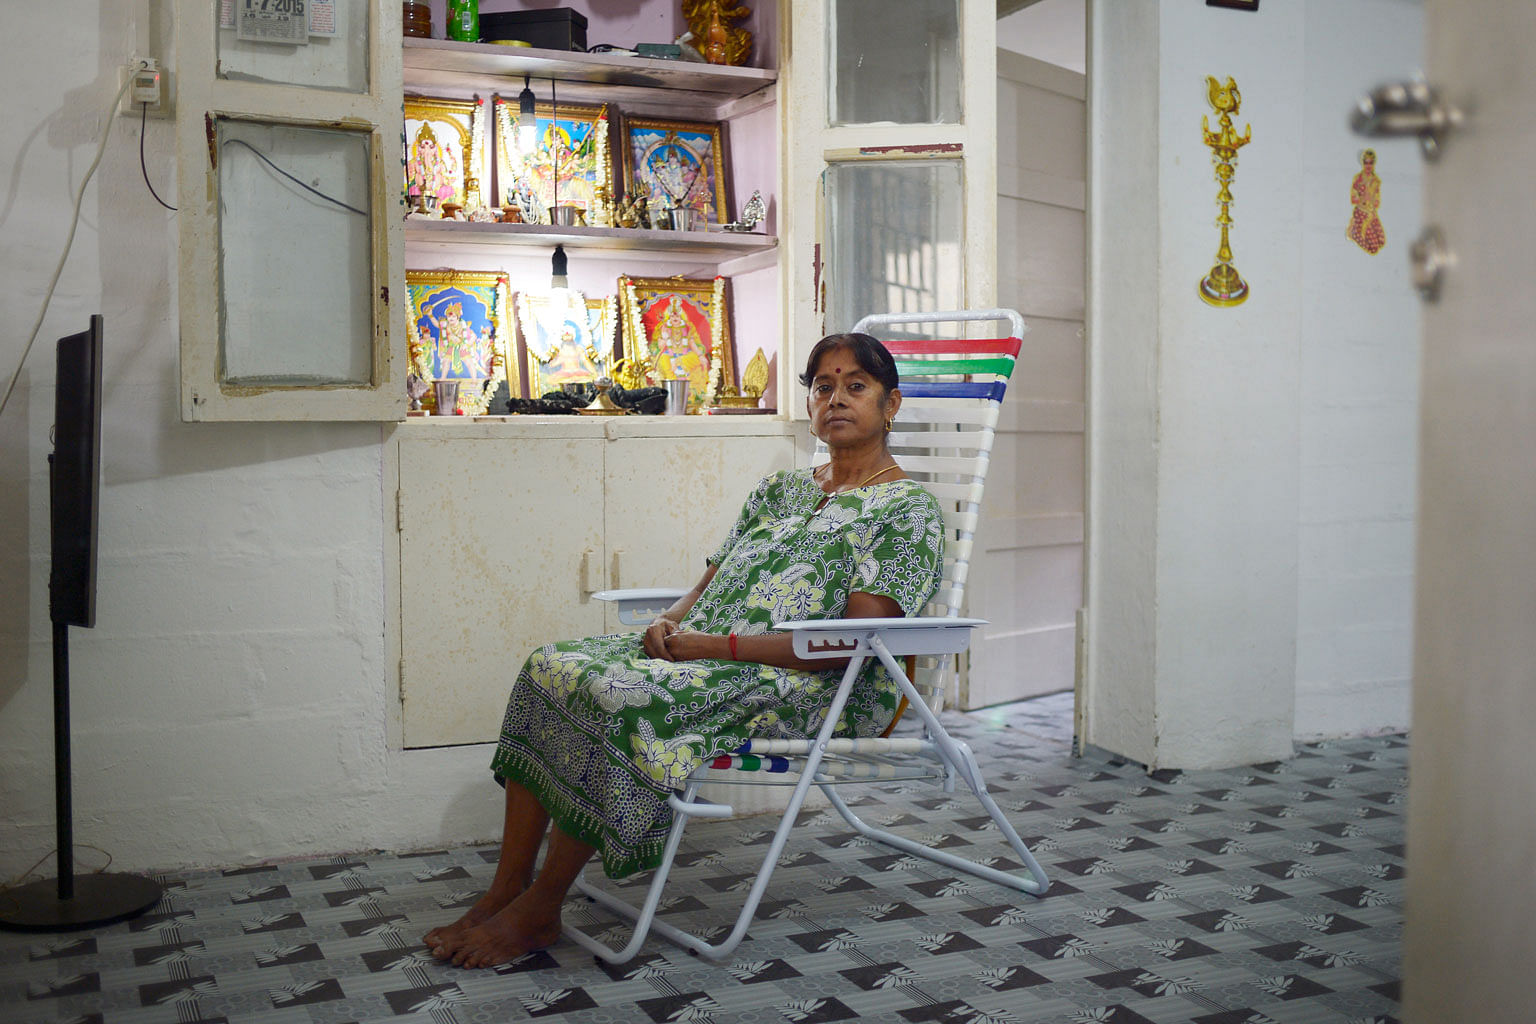 Madam Velu Rukumani, 61, has lived in the estate for 14 years. She says she will miss her seventh-floor Chinese neighbour most, even though the women do not know each other's names and just call each other "auntie".